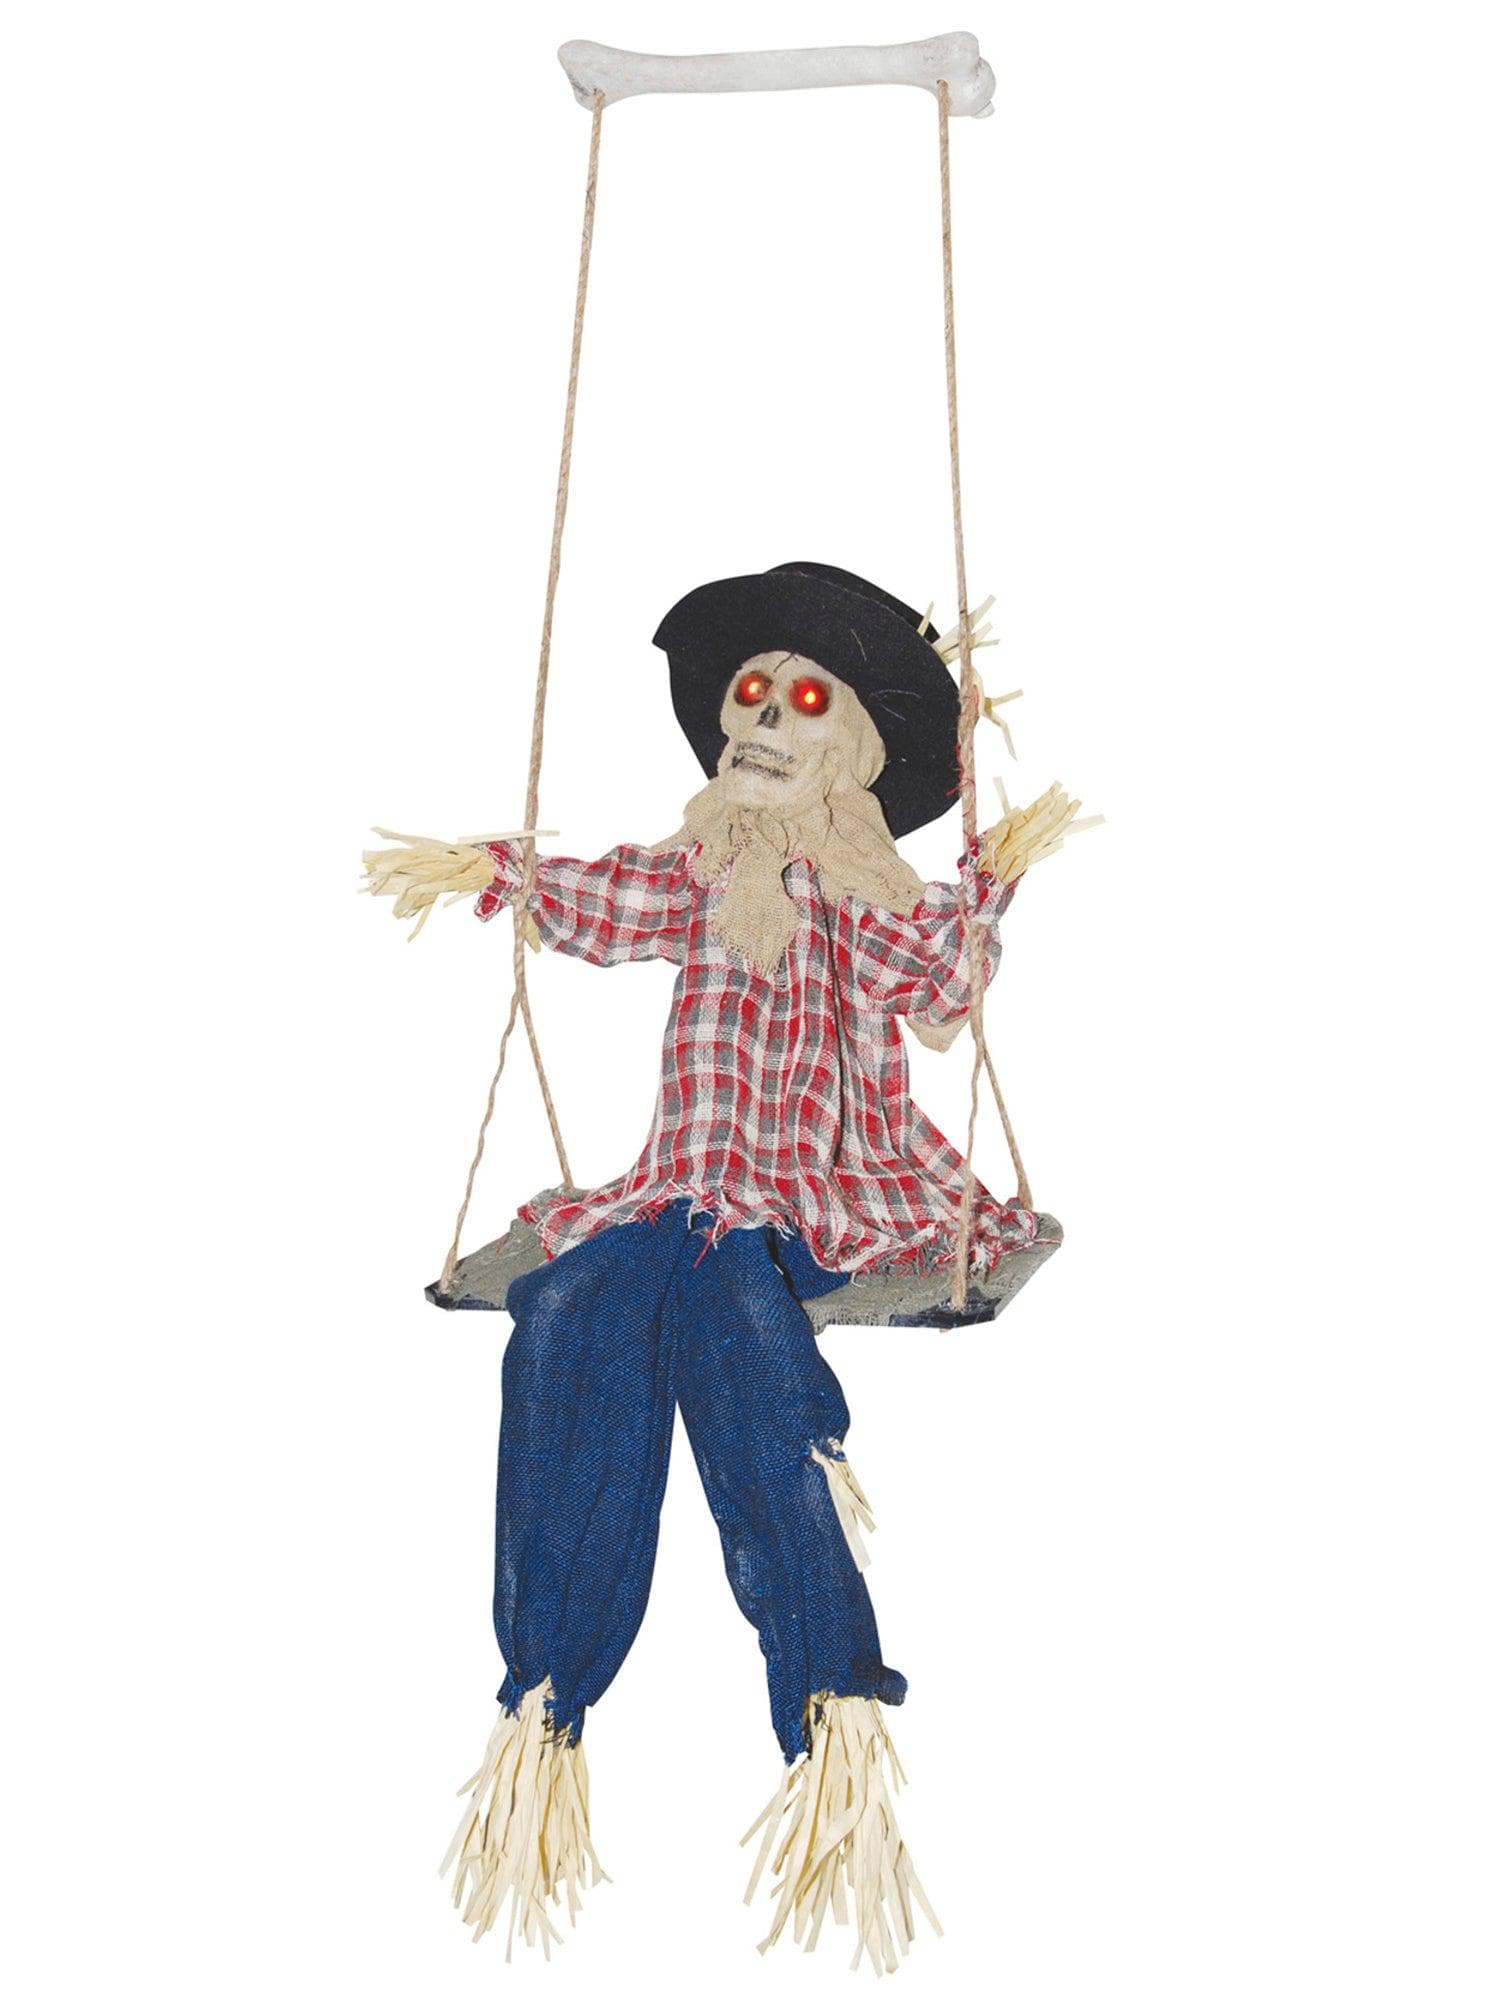 20 Inch Kicking Scarecrow on Swing Light Up Animated Prop - costumes.com